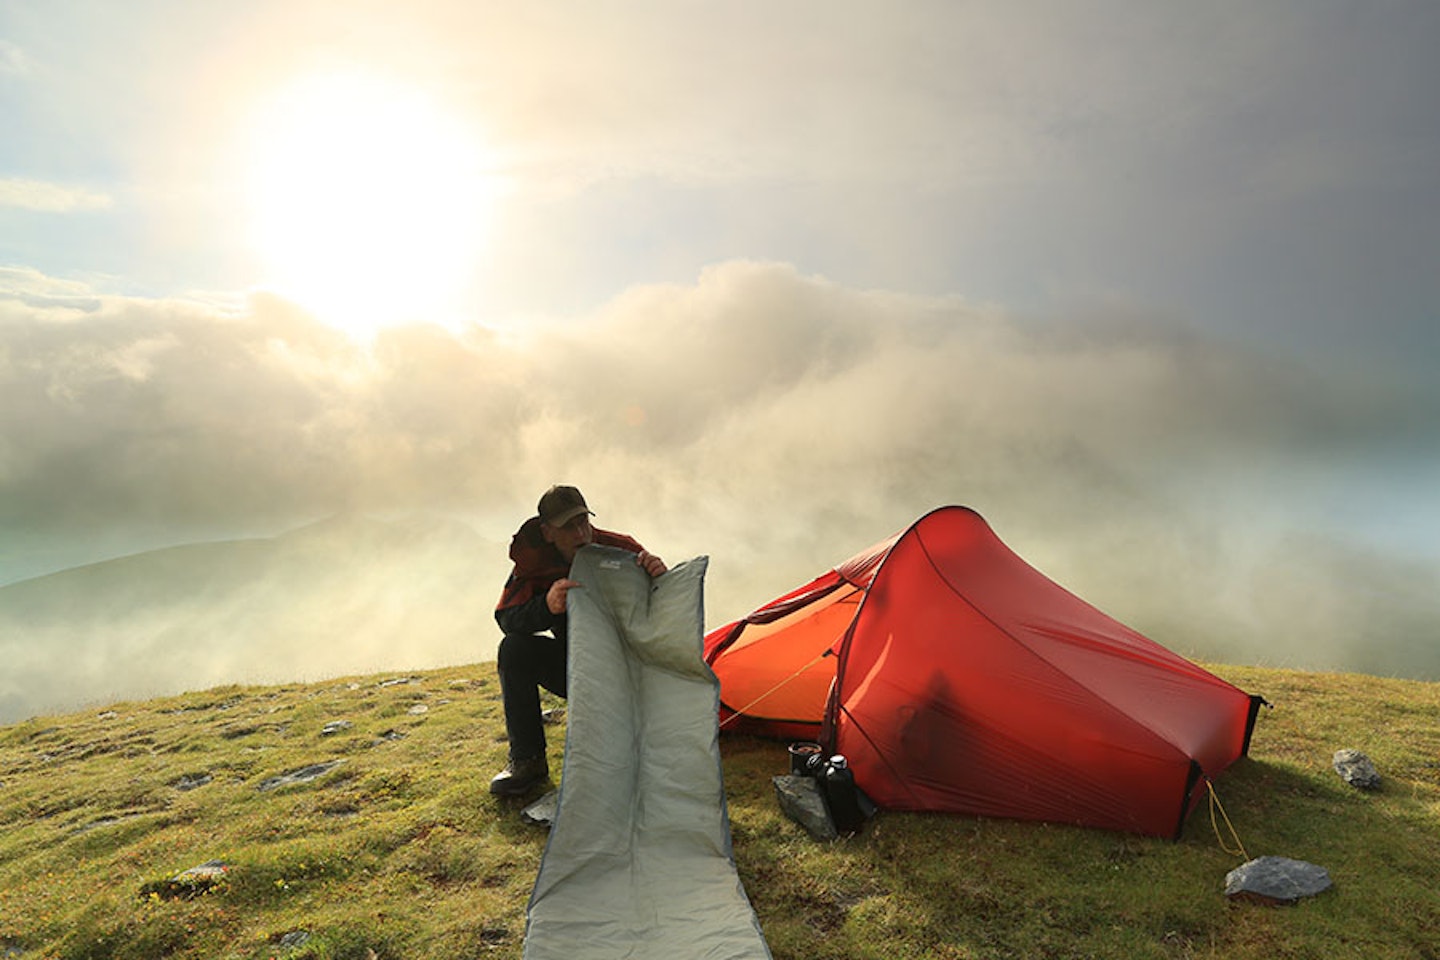 man inflating a sleeping mat by a tent on a hill above a cloud inversion